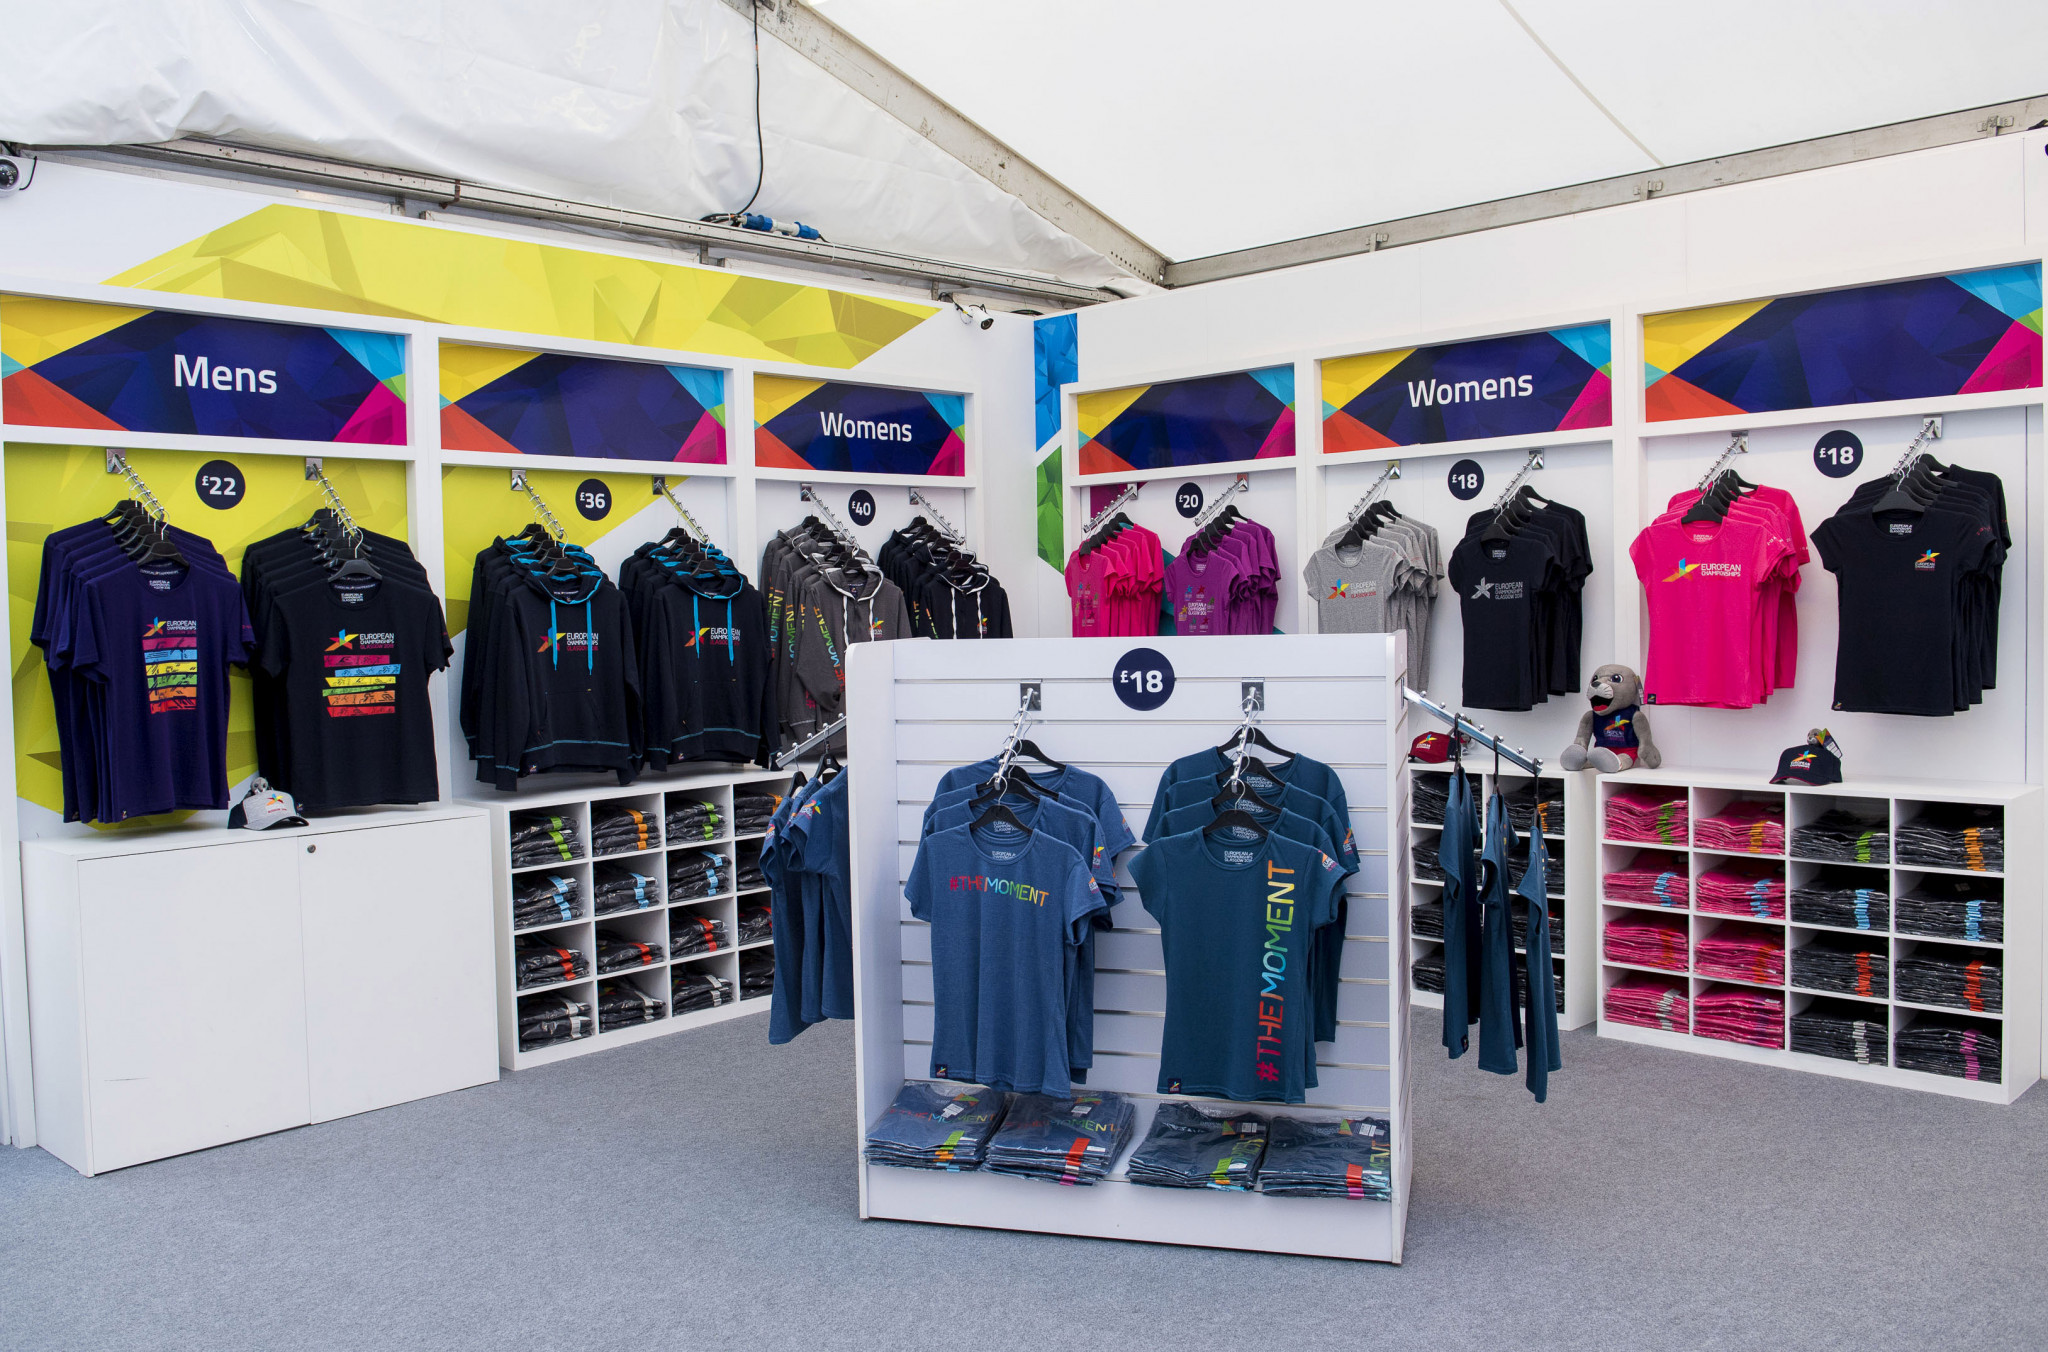 The shop in George Square has opened over a month before the Championships begin on August 1 ©Glasgow 2018